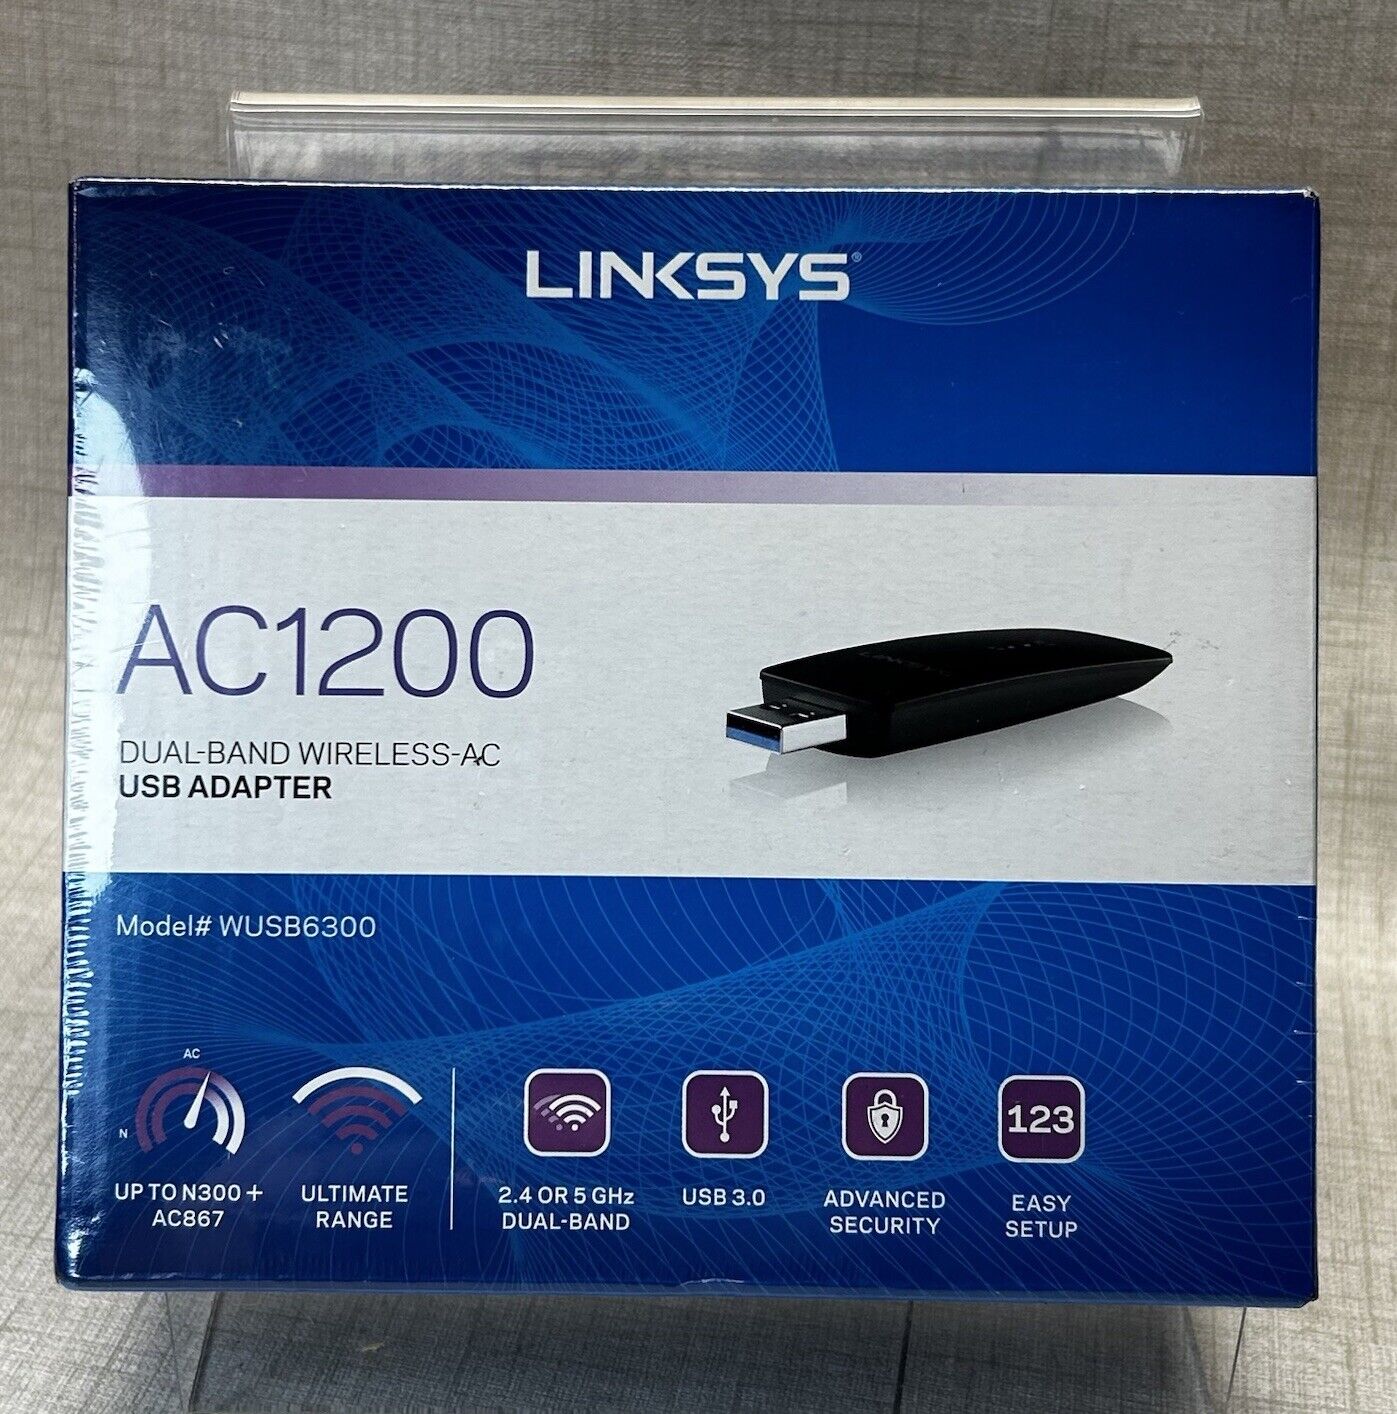 NEW In Box Sealed Linksys WUSB6300 Dual-Band AC1200 Wireless USB 3.0 Adapter 